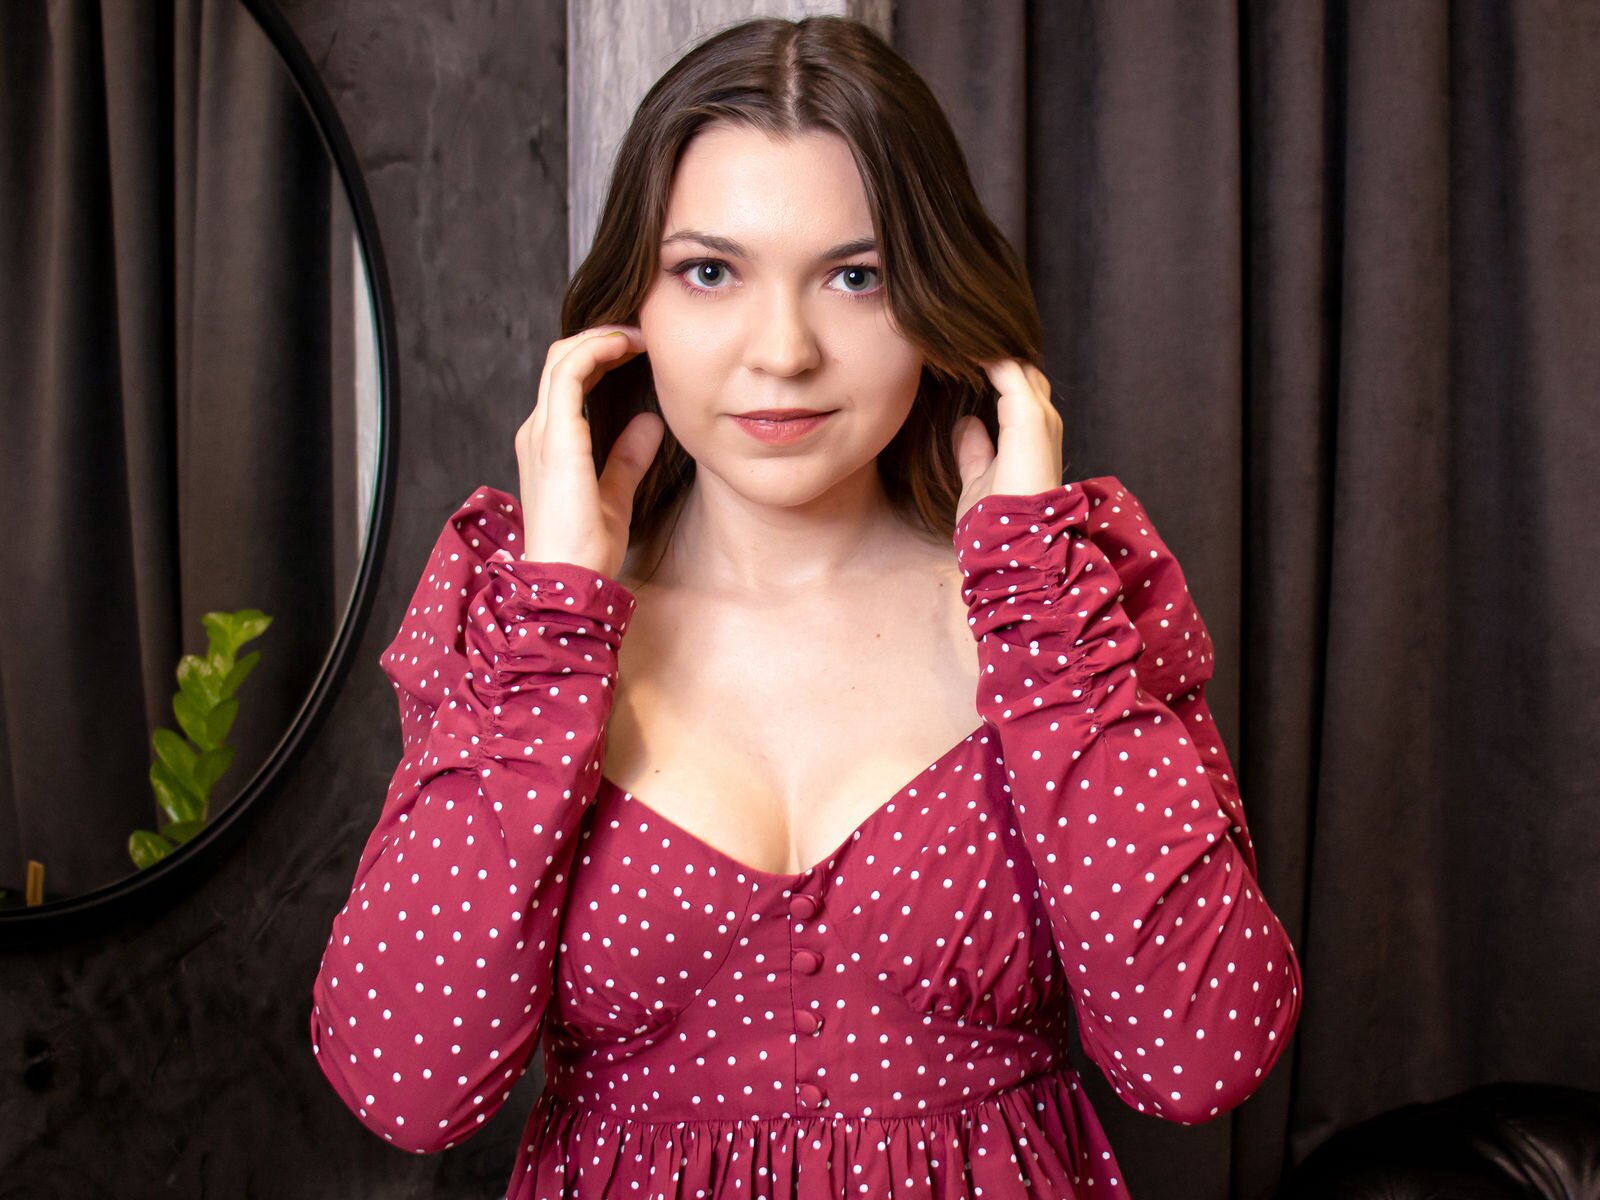 Free Live Sex Chat With HollyLambert